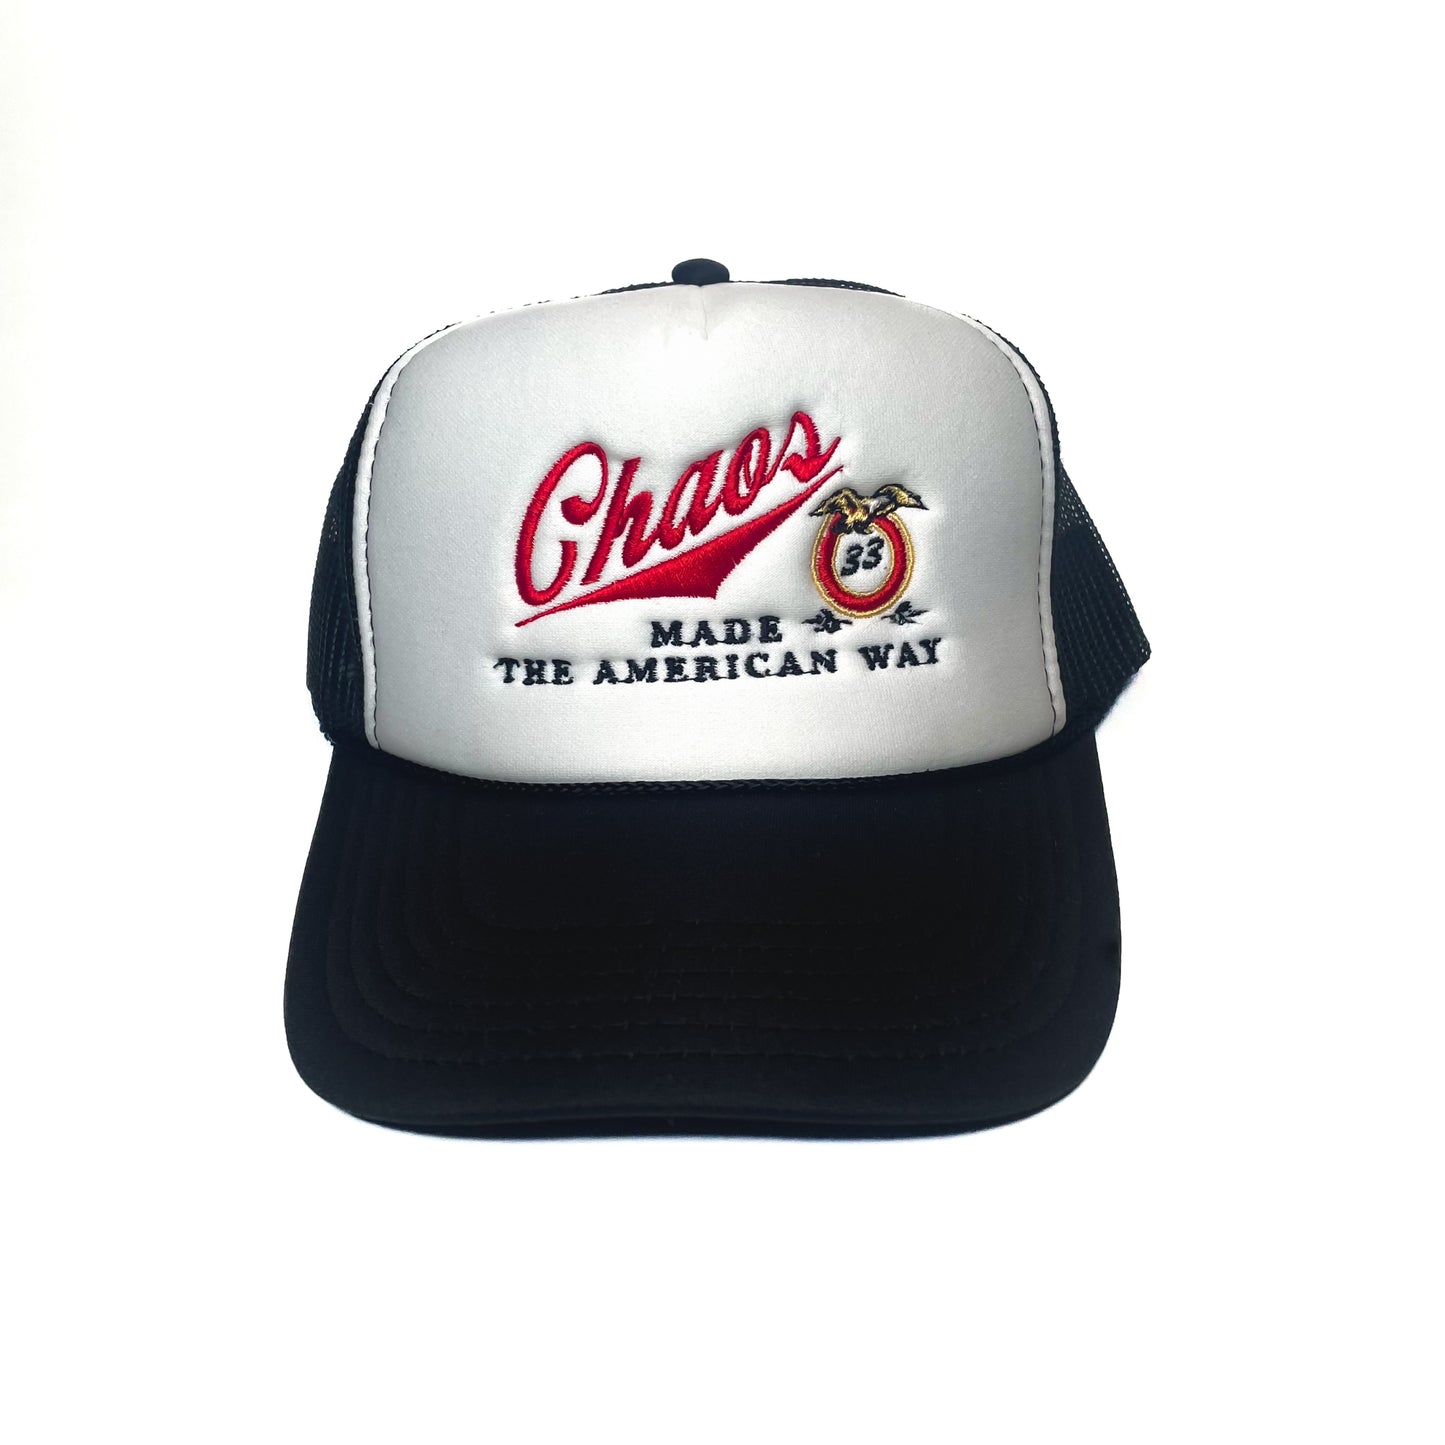 "CHAOS MADE THE AMERICAN WAY" TRUCKER HAT